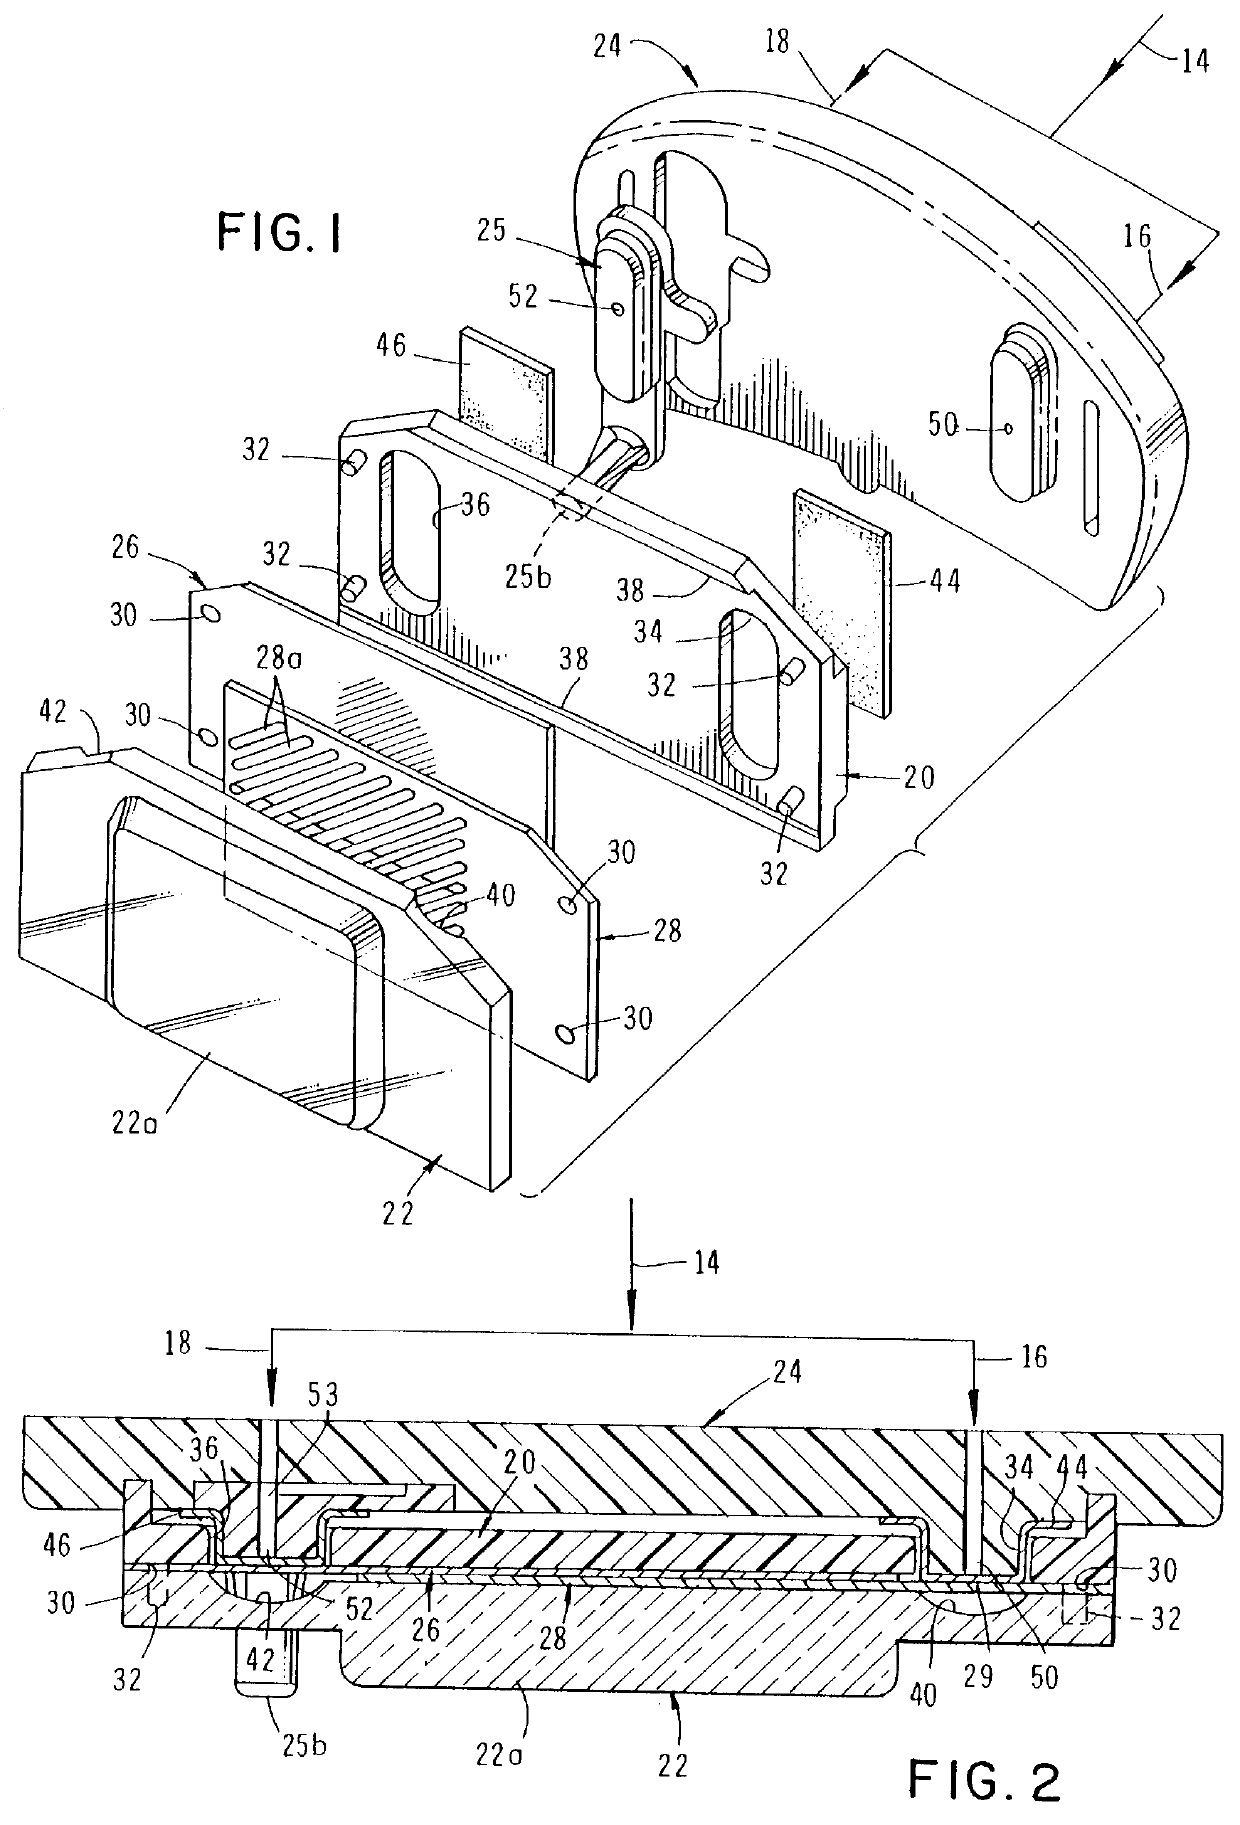 Apparatus for indicating fluid pressure in a conduit